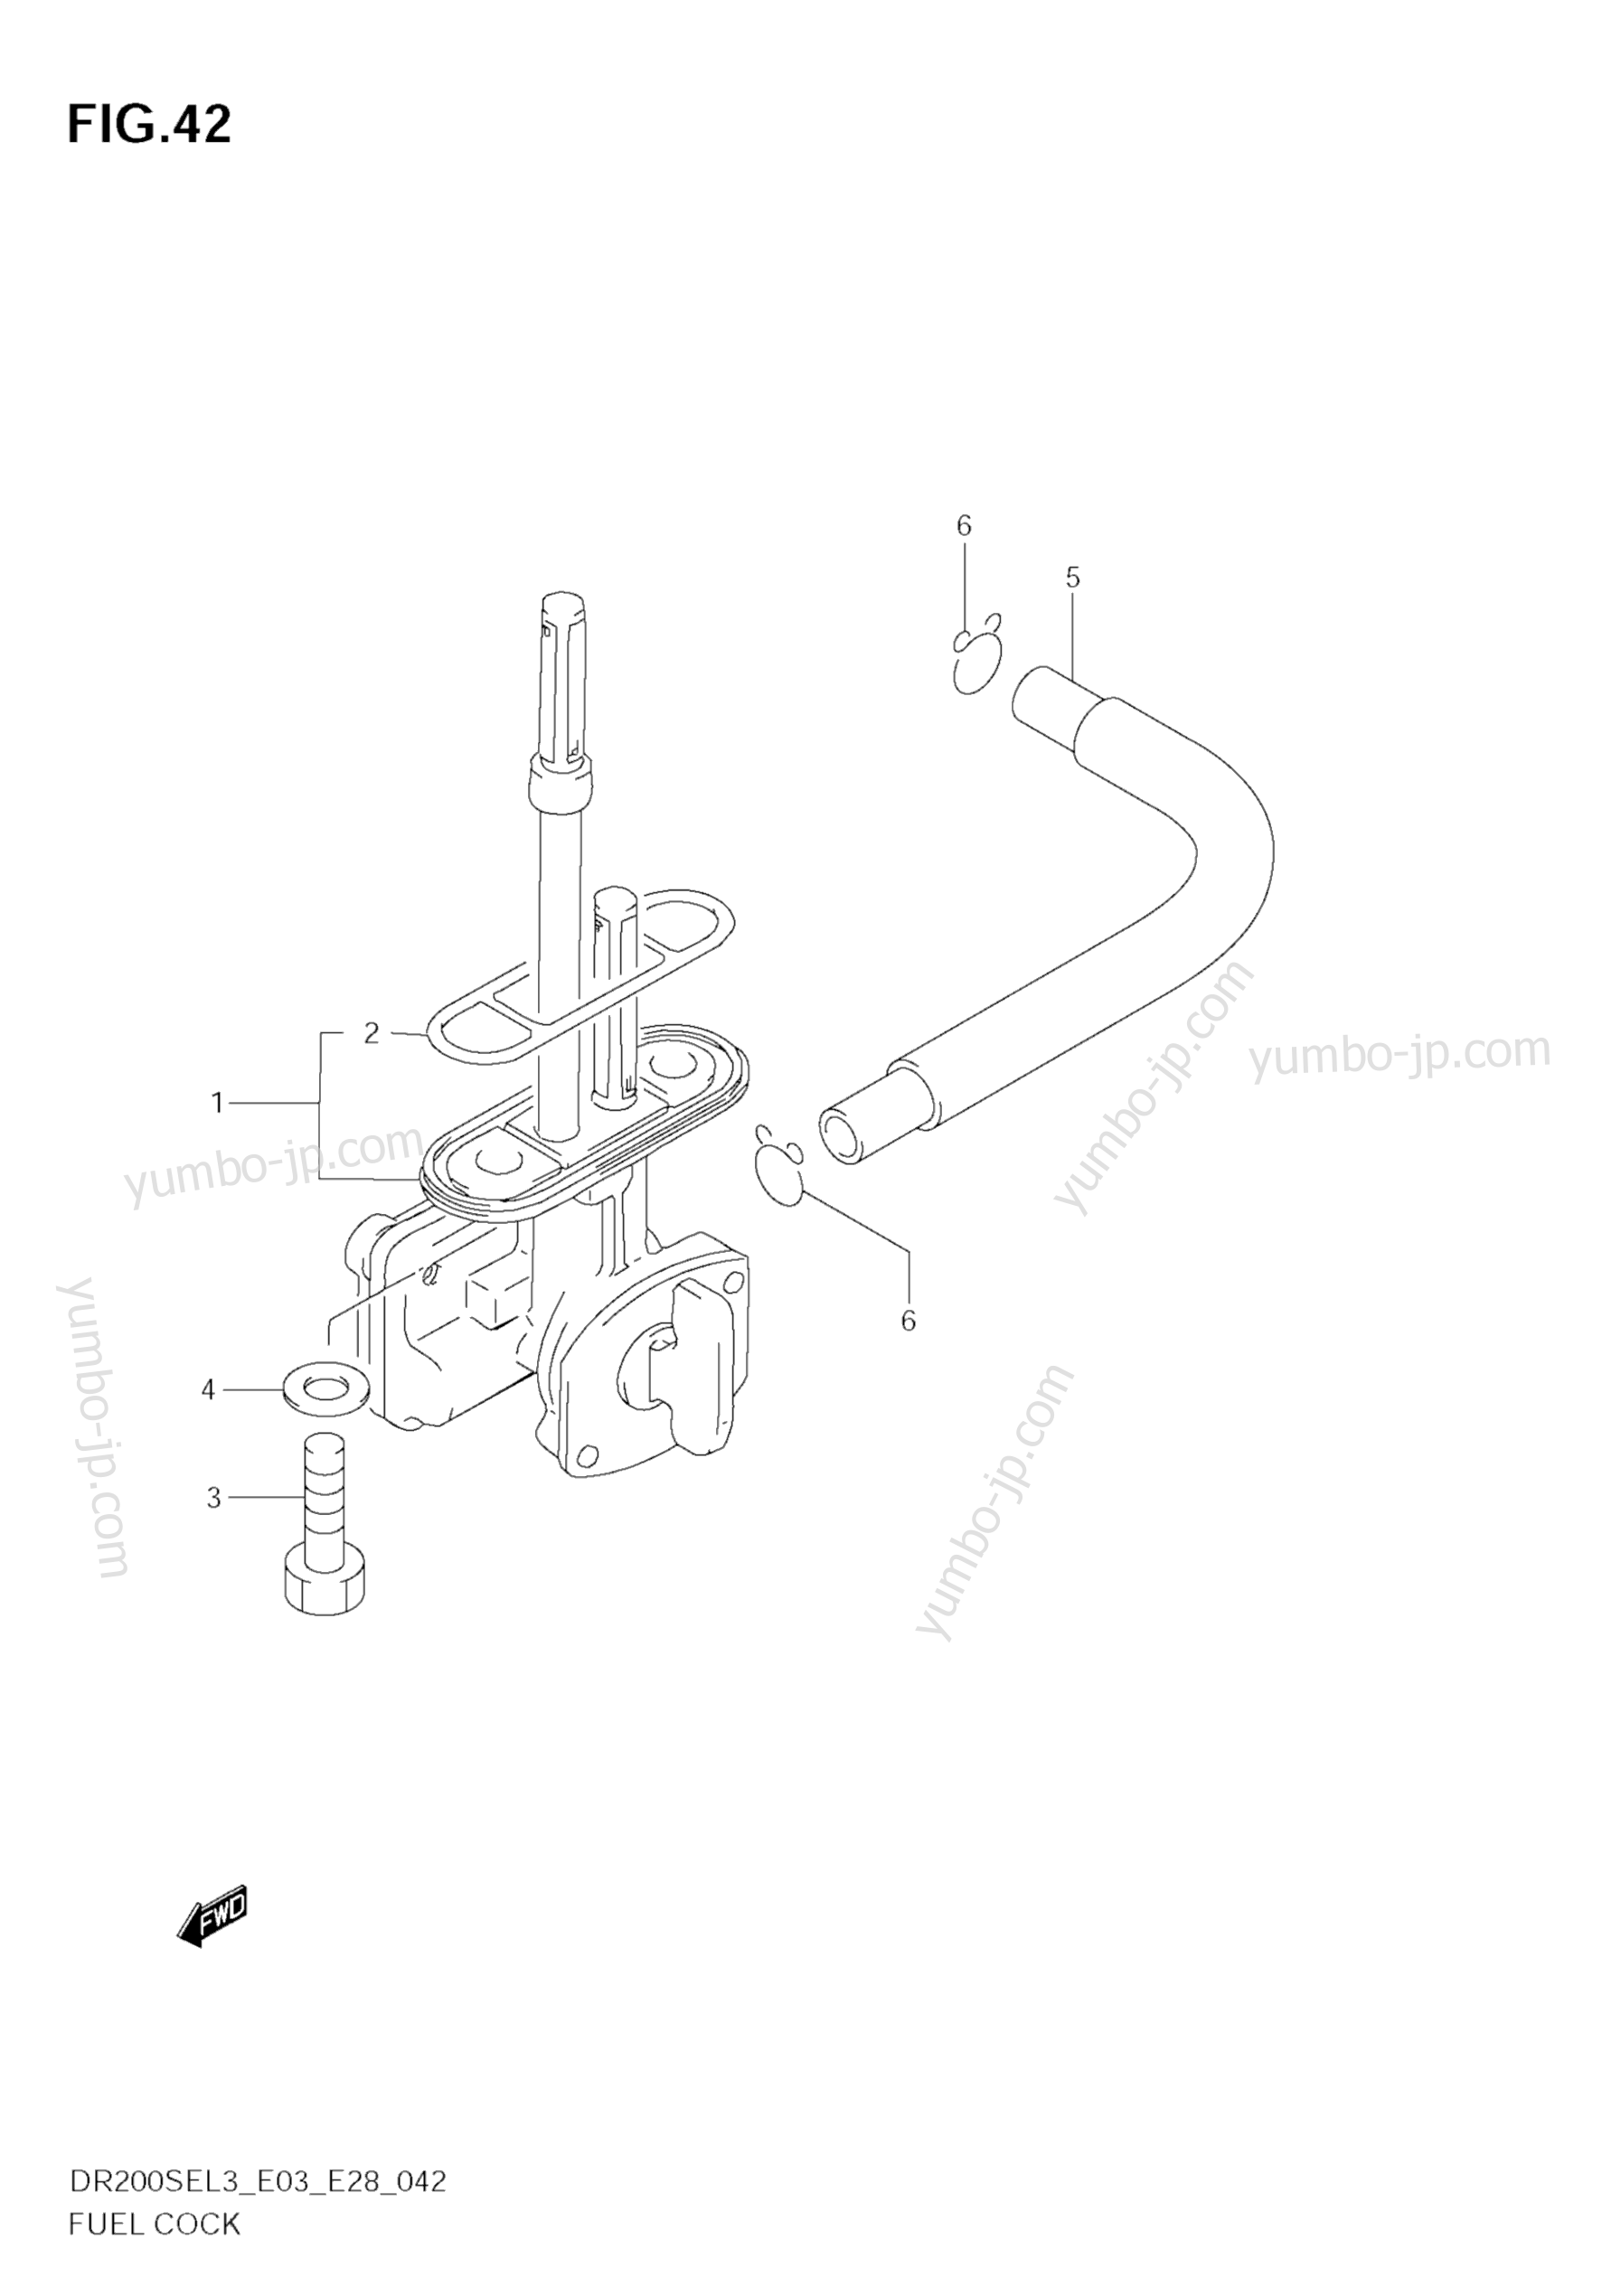 FUEL COCK (DR200SEL3 E33) for motorcycles SUZUKI DR200SE 2013 year